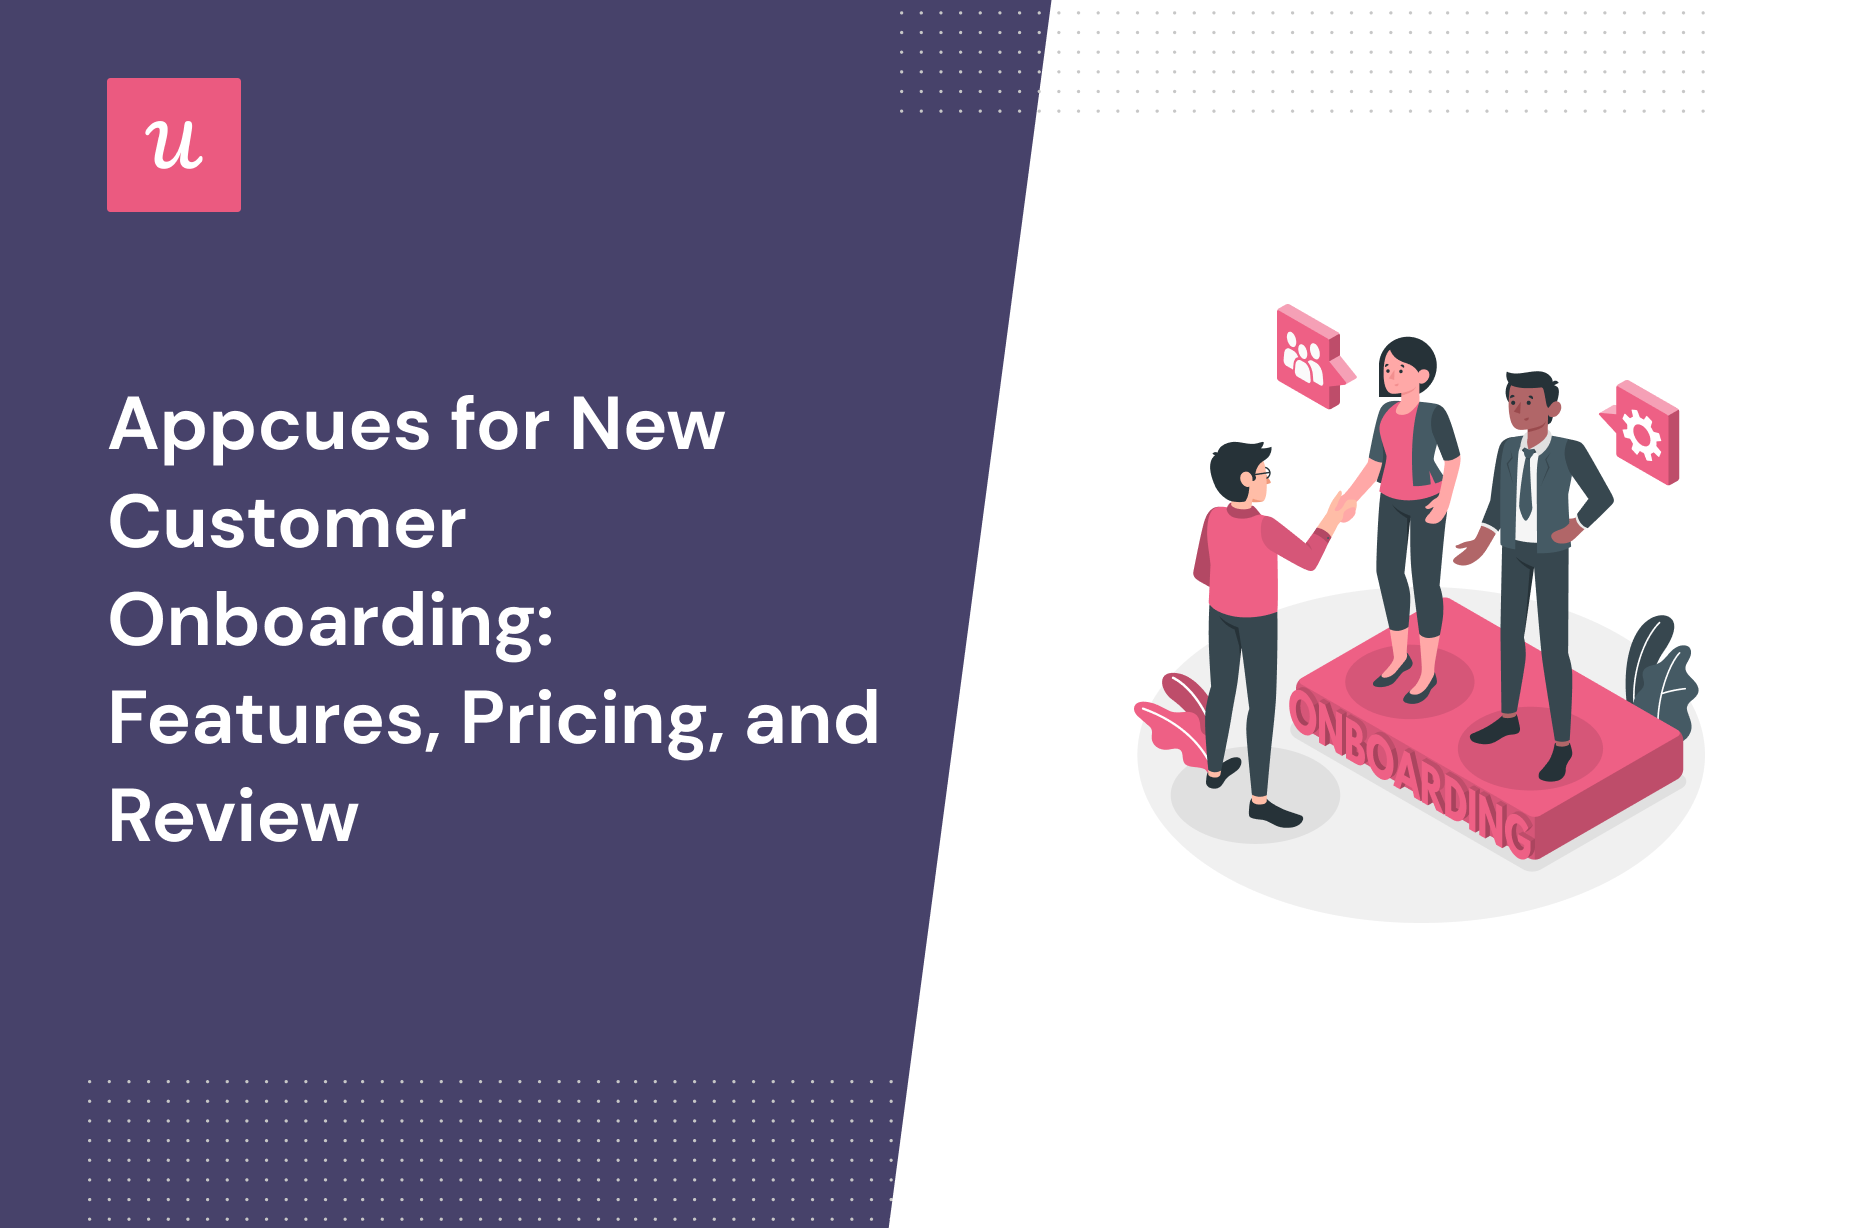 Appcues for New Customer Onboarding: Features, Pricing, and Review